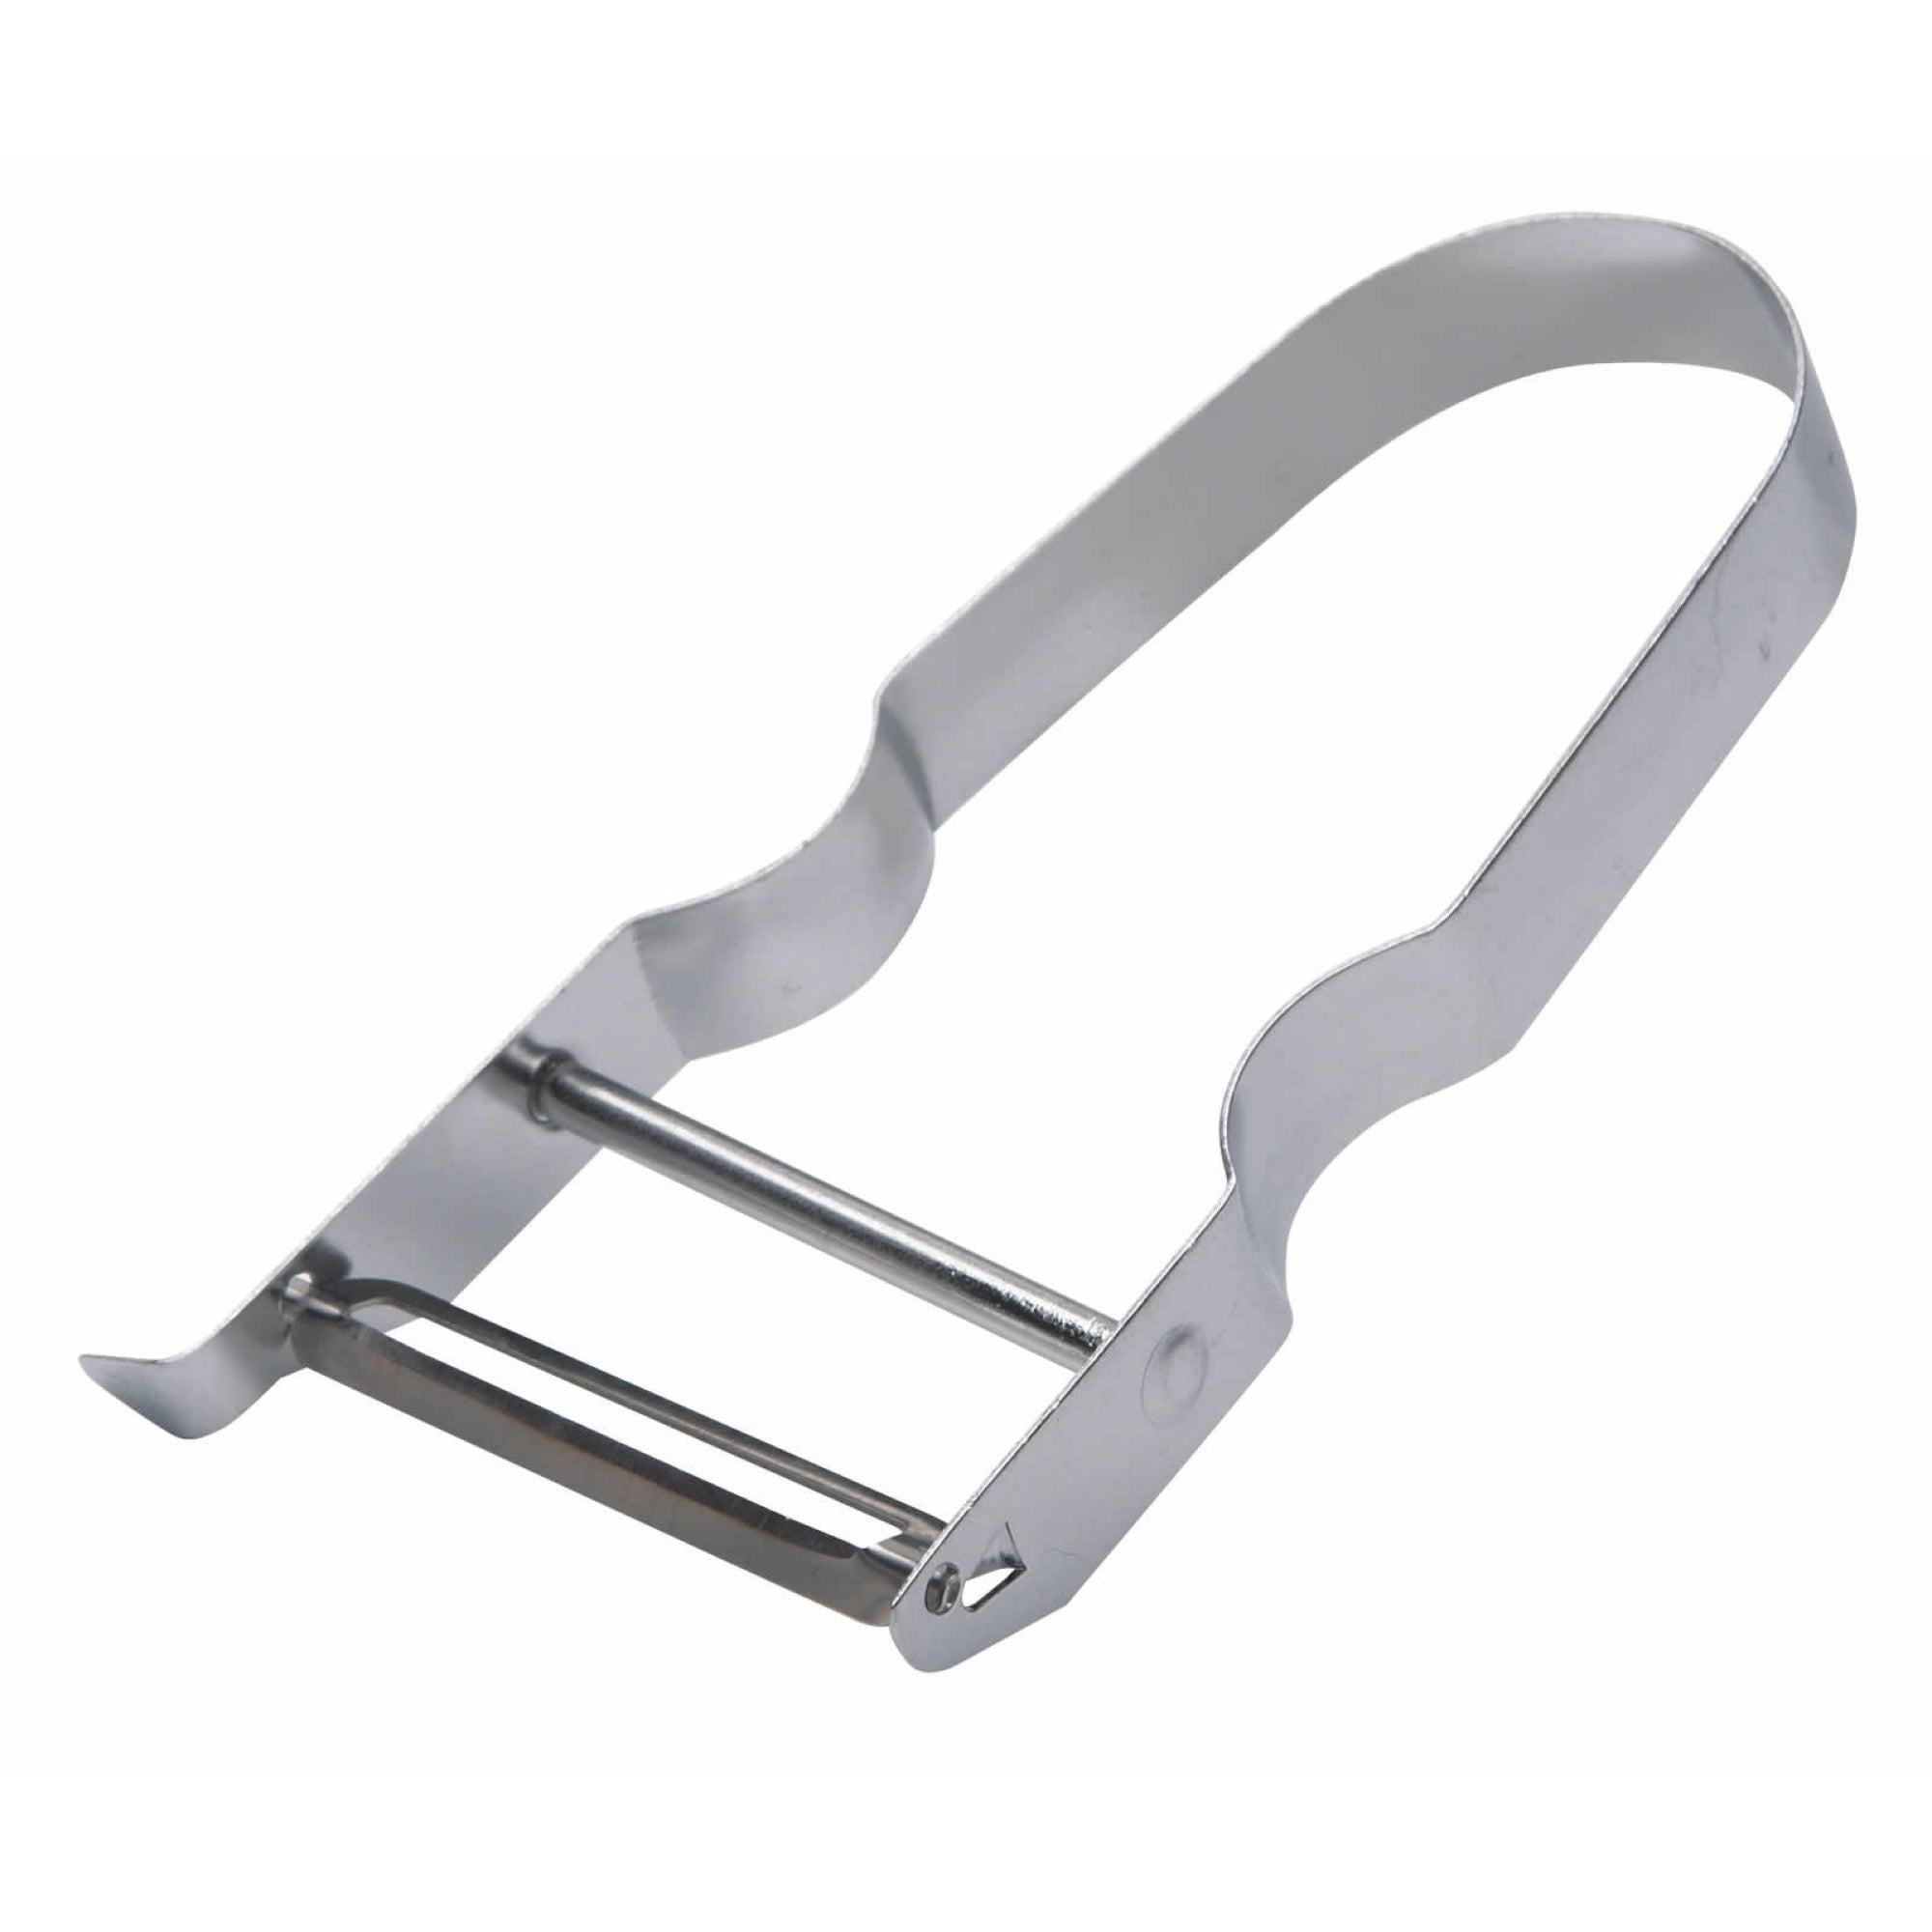 http://katescupboard.co.uk/cdn/shop/products/KitchenCraft_Stainless_Steel_Safety_Vegetable_Peeler_the_cooks_cupboard.jpg?v=1619208510